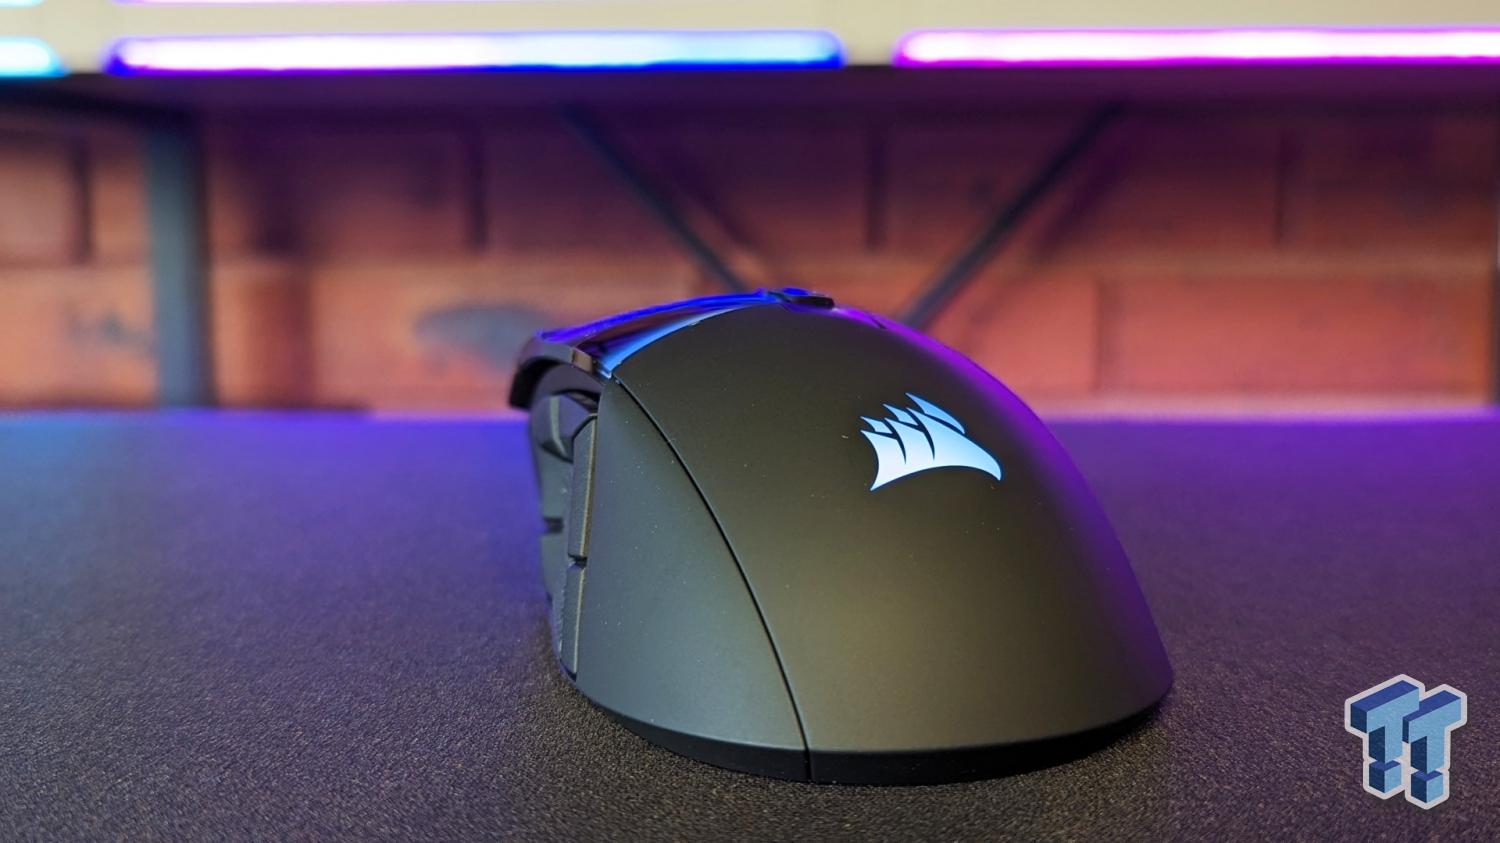 DARKSTAR WIRELESS RGB MMO Gaming Mouse